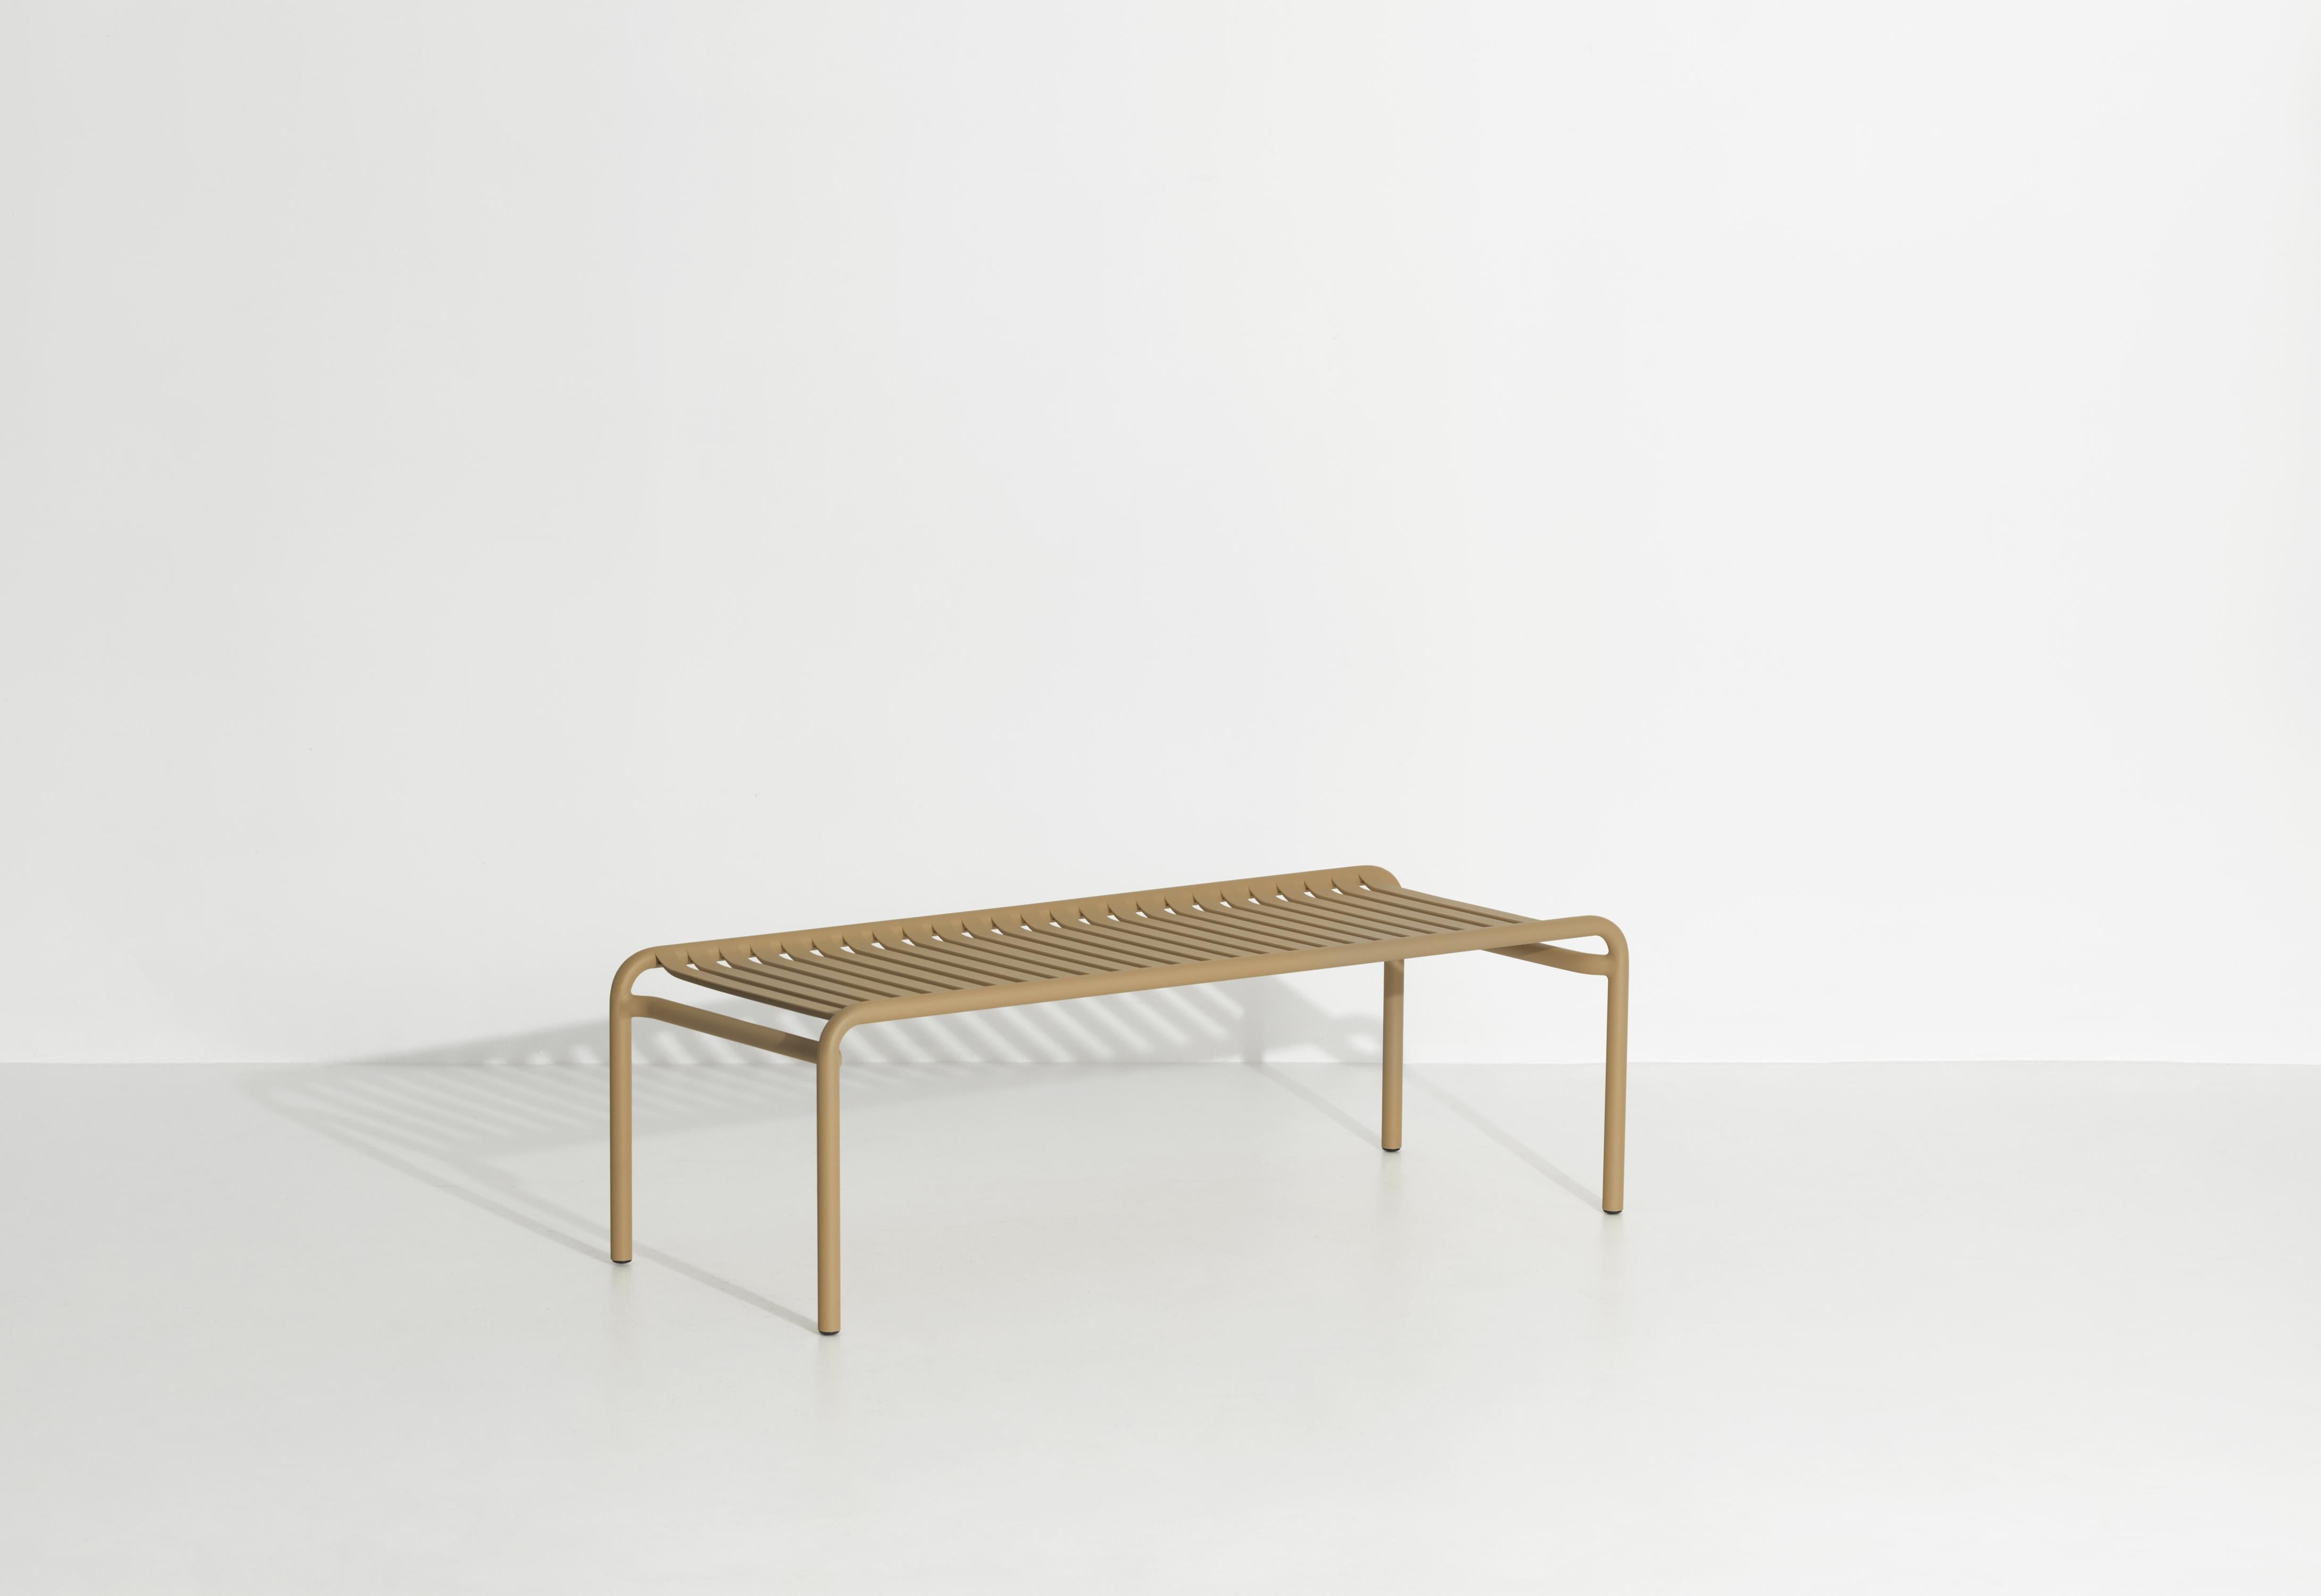 Petite Friture Week-End Long Coffee Table in Gold Aluminium by Studio BrichetZiegler, 2017

The week-end collection is a full range of outdoor furniture, in aluminium grained epoxy paint, matt finish, that includes 18 functions and 8 colours for